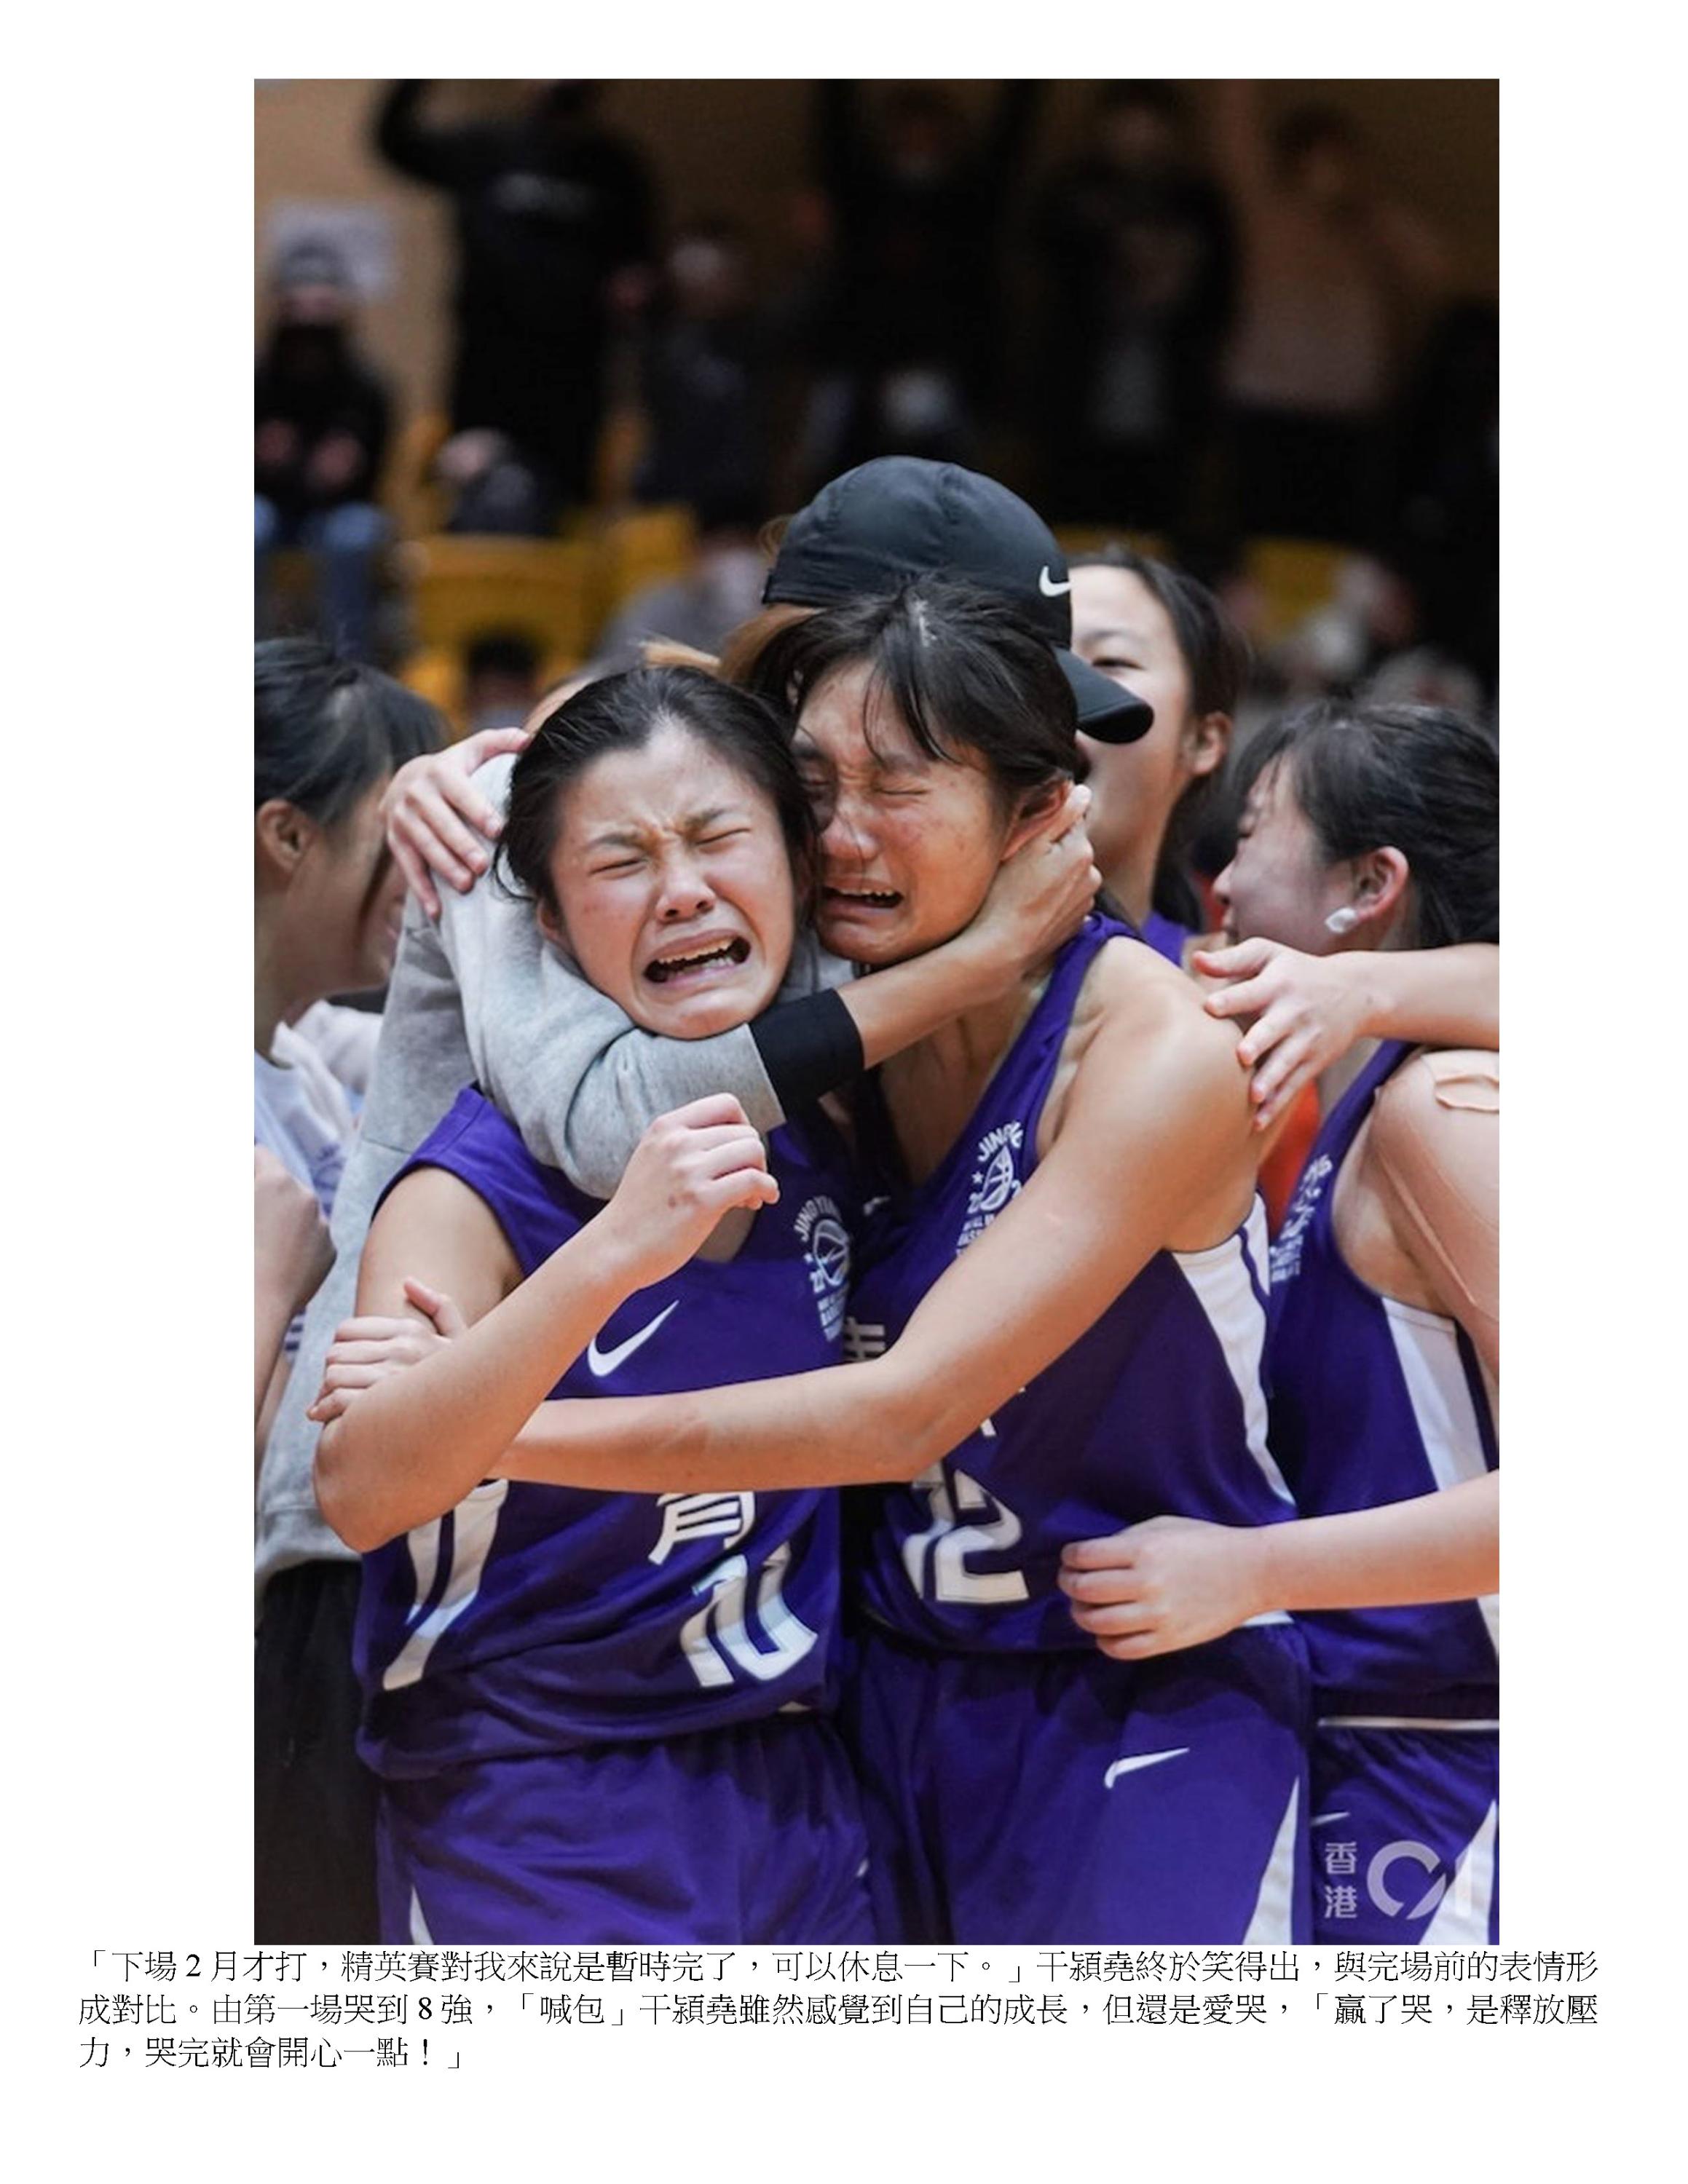 CYMCASS  Girl’s basketball team defeated Diocesan Girls' School to successfully enter the semi-final and get ready to fight against Lam Tai Fai Collegeon